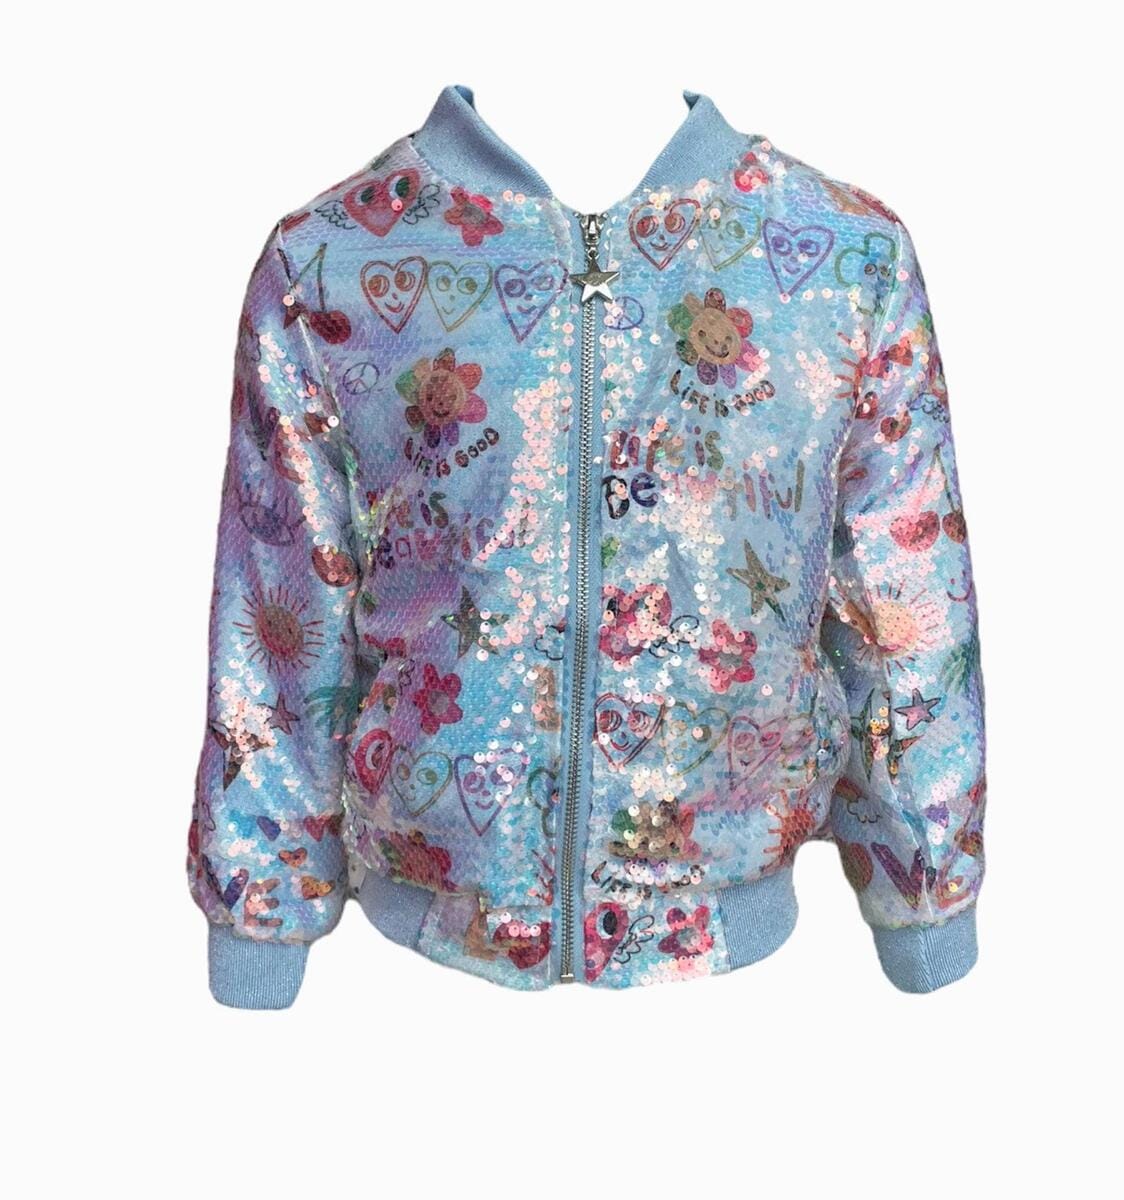 Good Vibes Doodle Sequin Bomber 150 GIRLS APPAREL 2-8 Lola & The Boys 2 